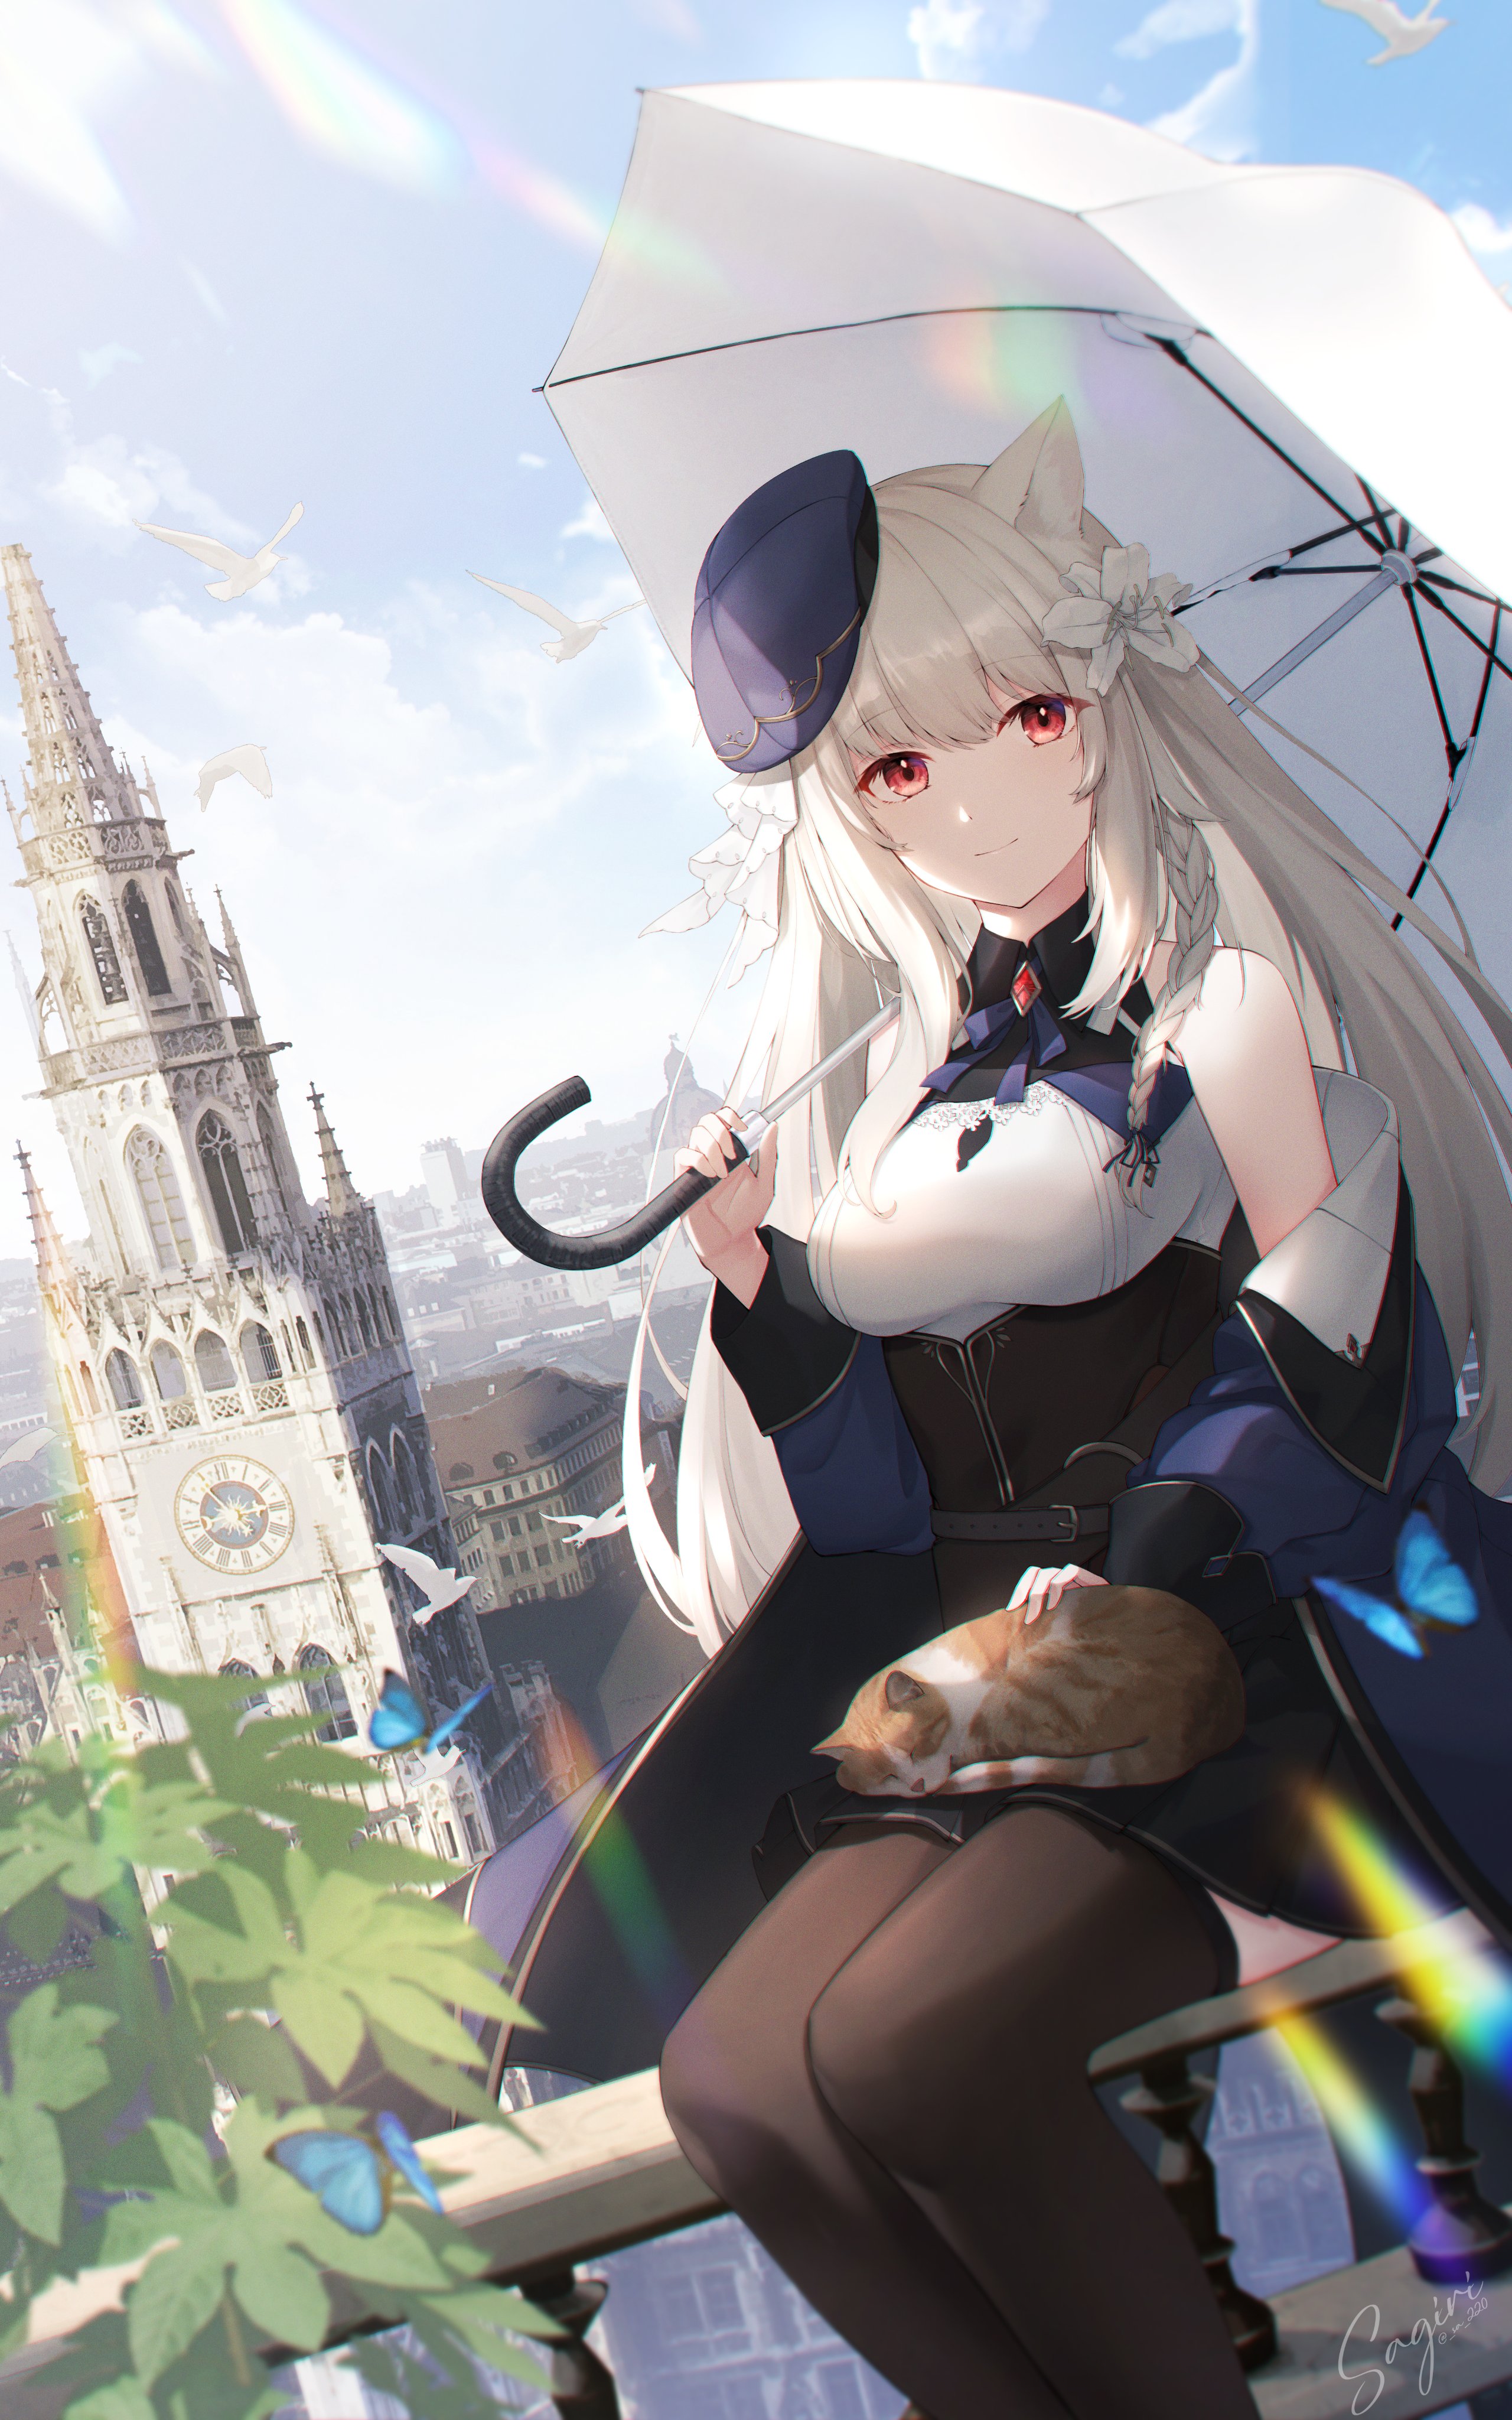 Anime 2560x4096 anime anime girls cats umbrella hat birds butterfly city portrait display red eyes cathedral sitting